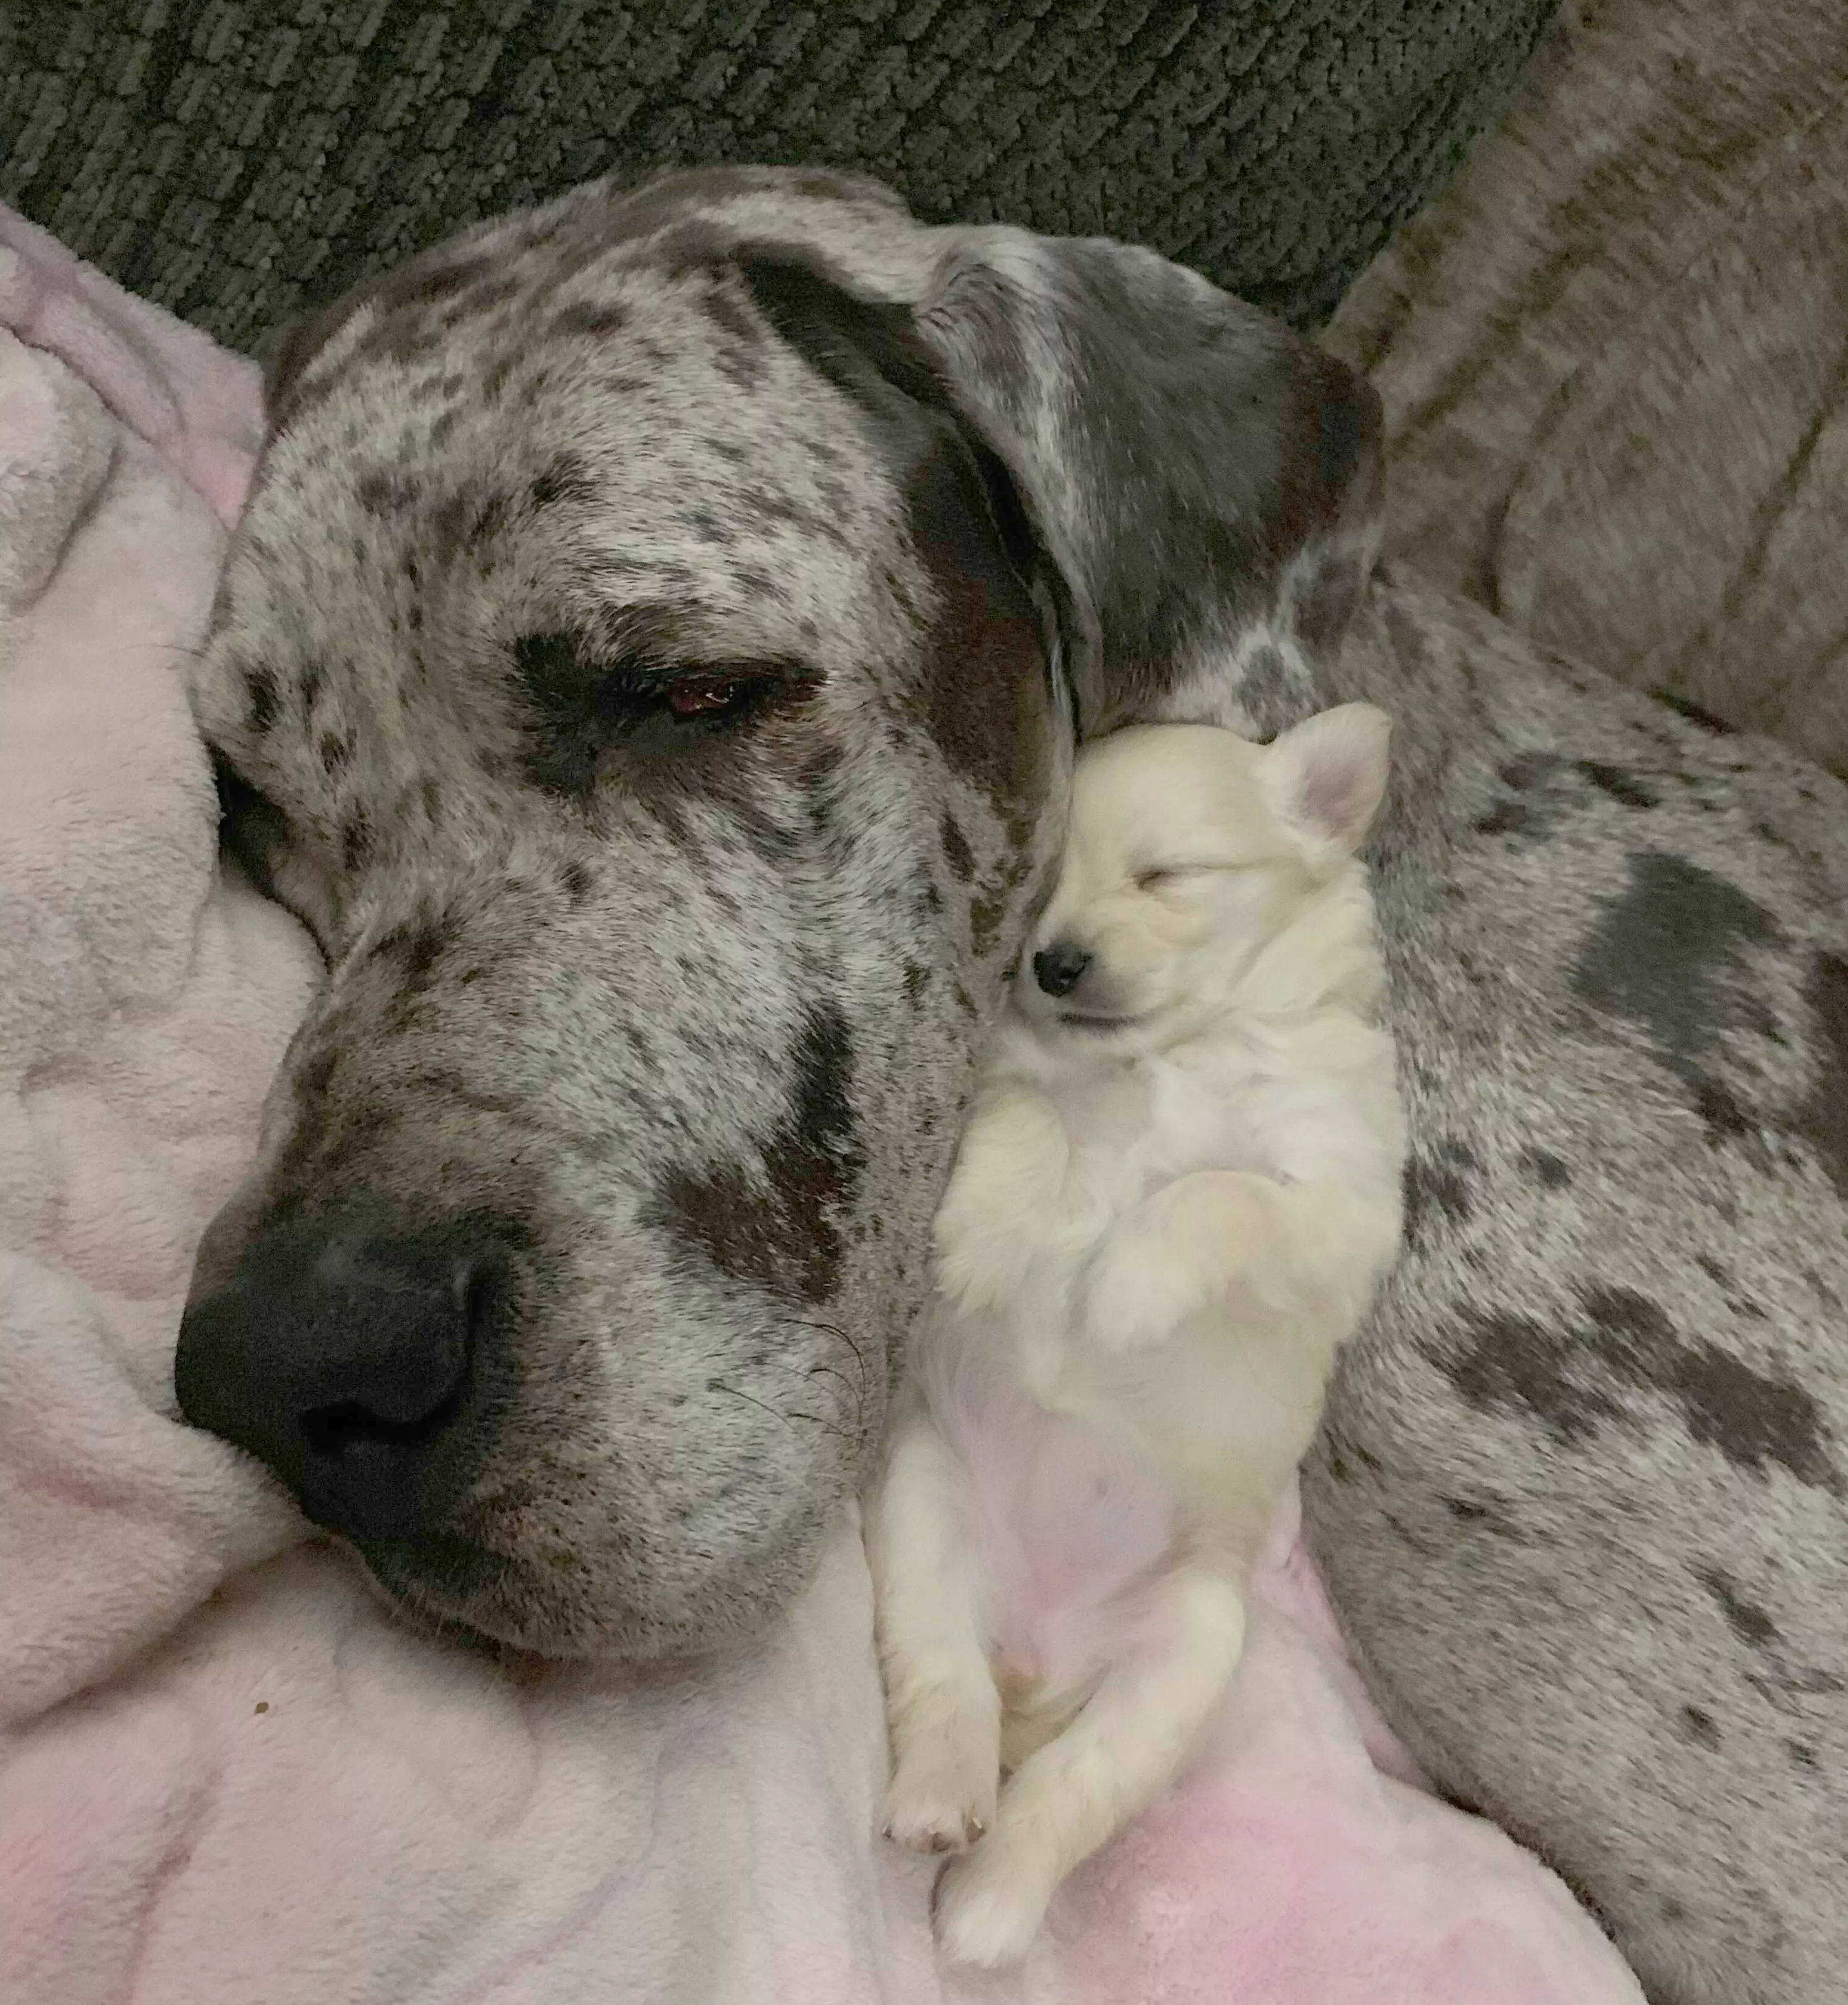 The doggy duo are best friends (